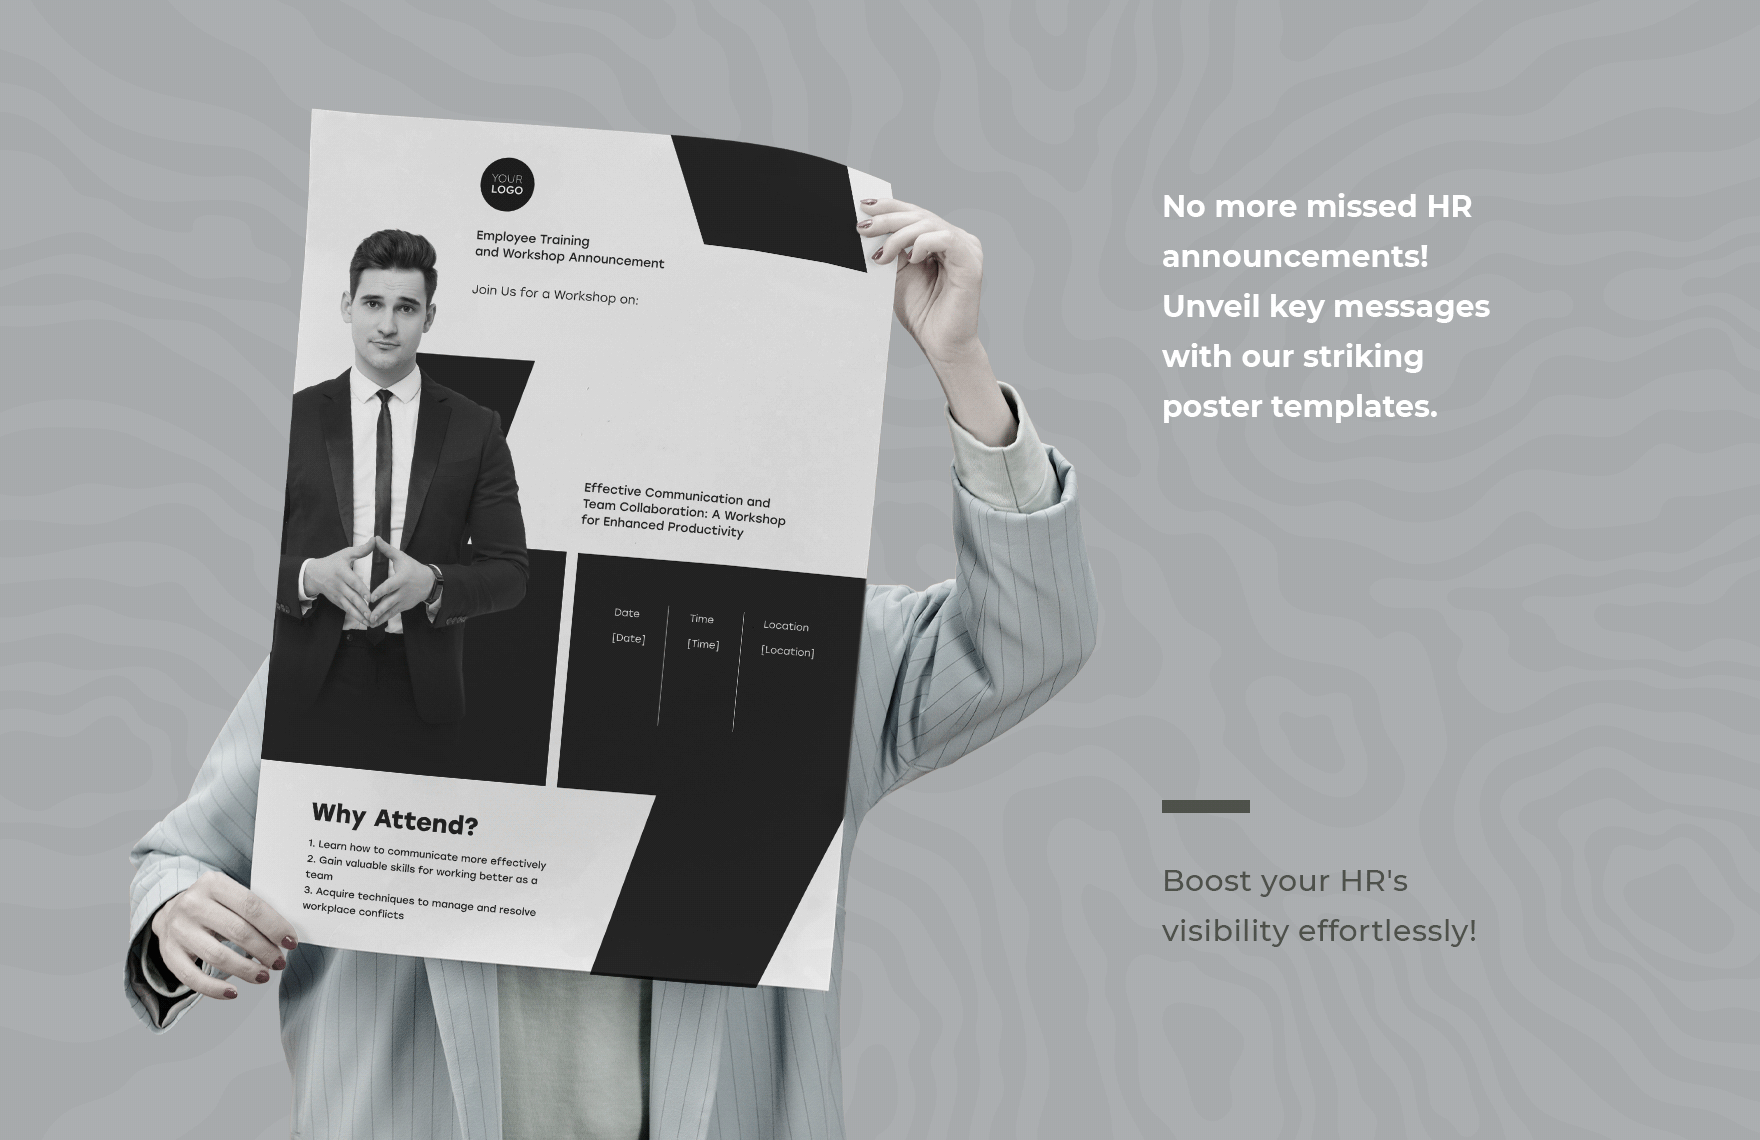 Employee Training and Workshop Announcement Poster HR Template